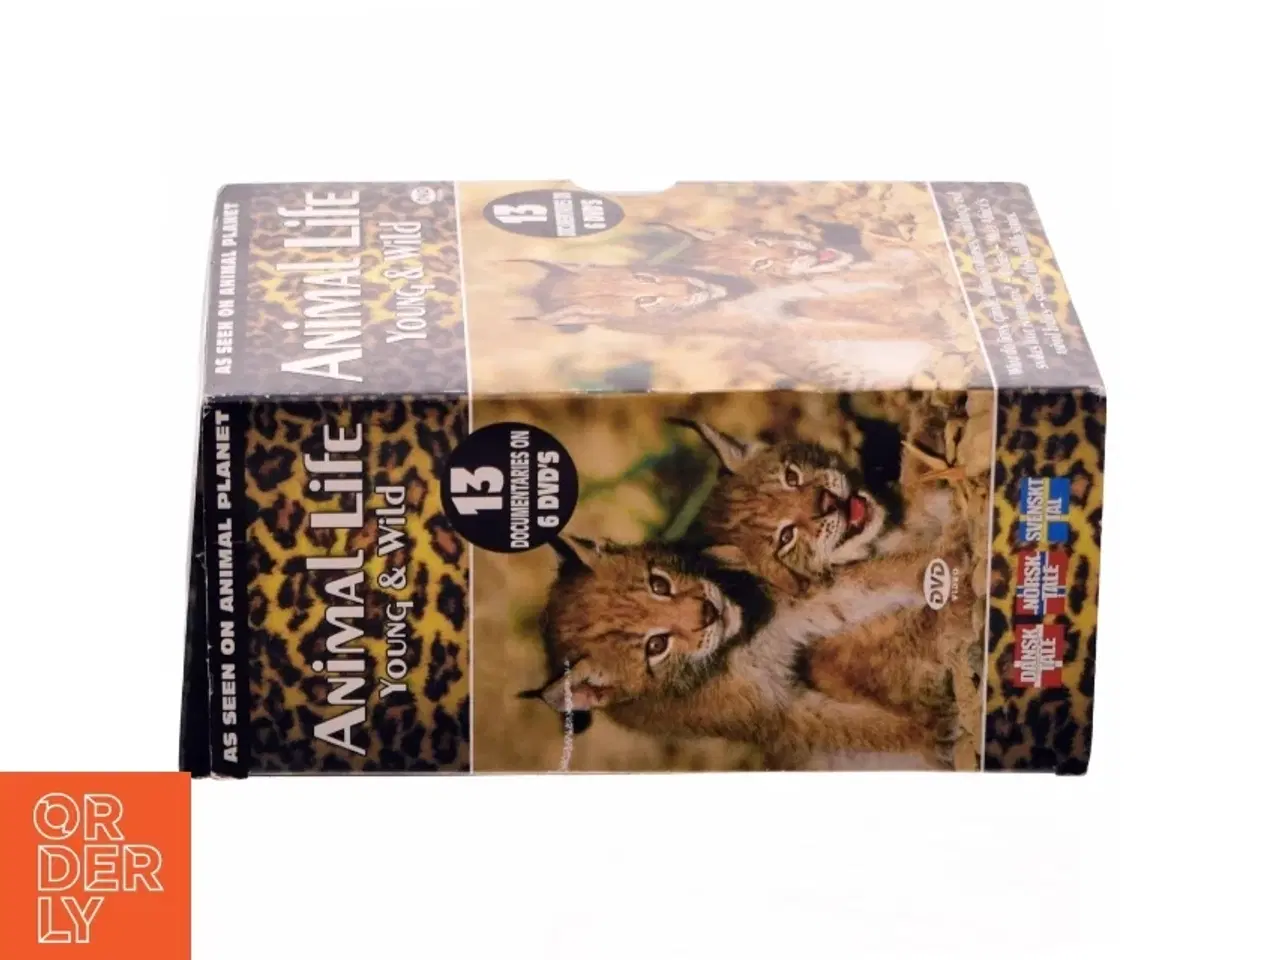 Billede 2 - Animal life, young and wild DVD